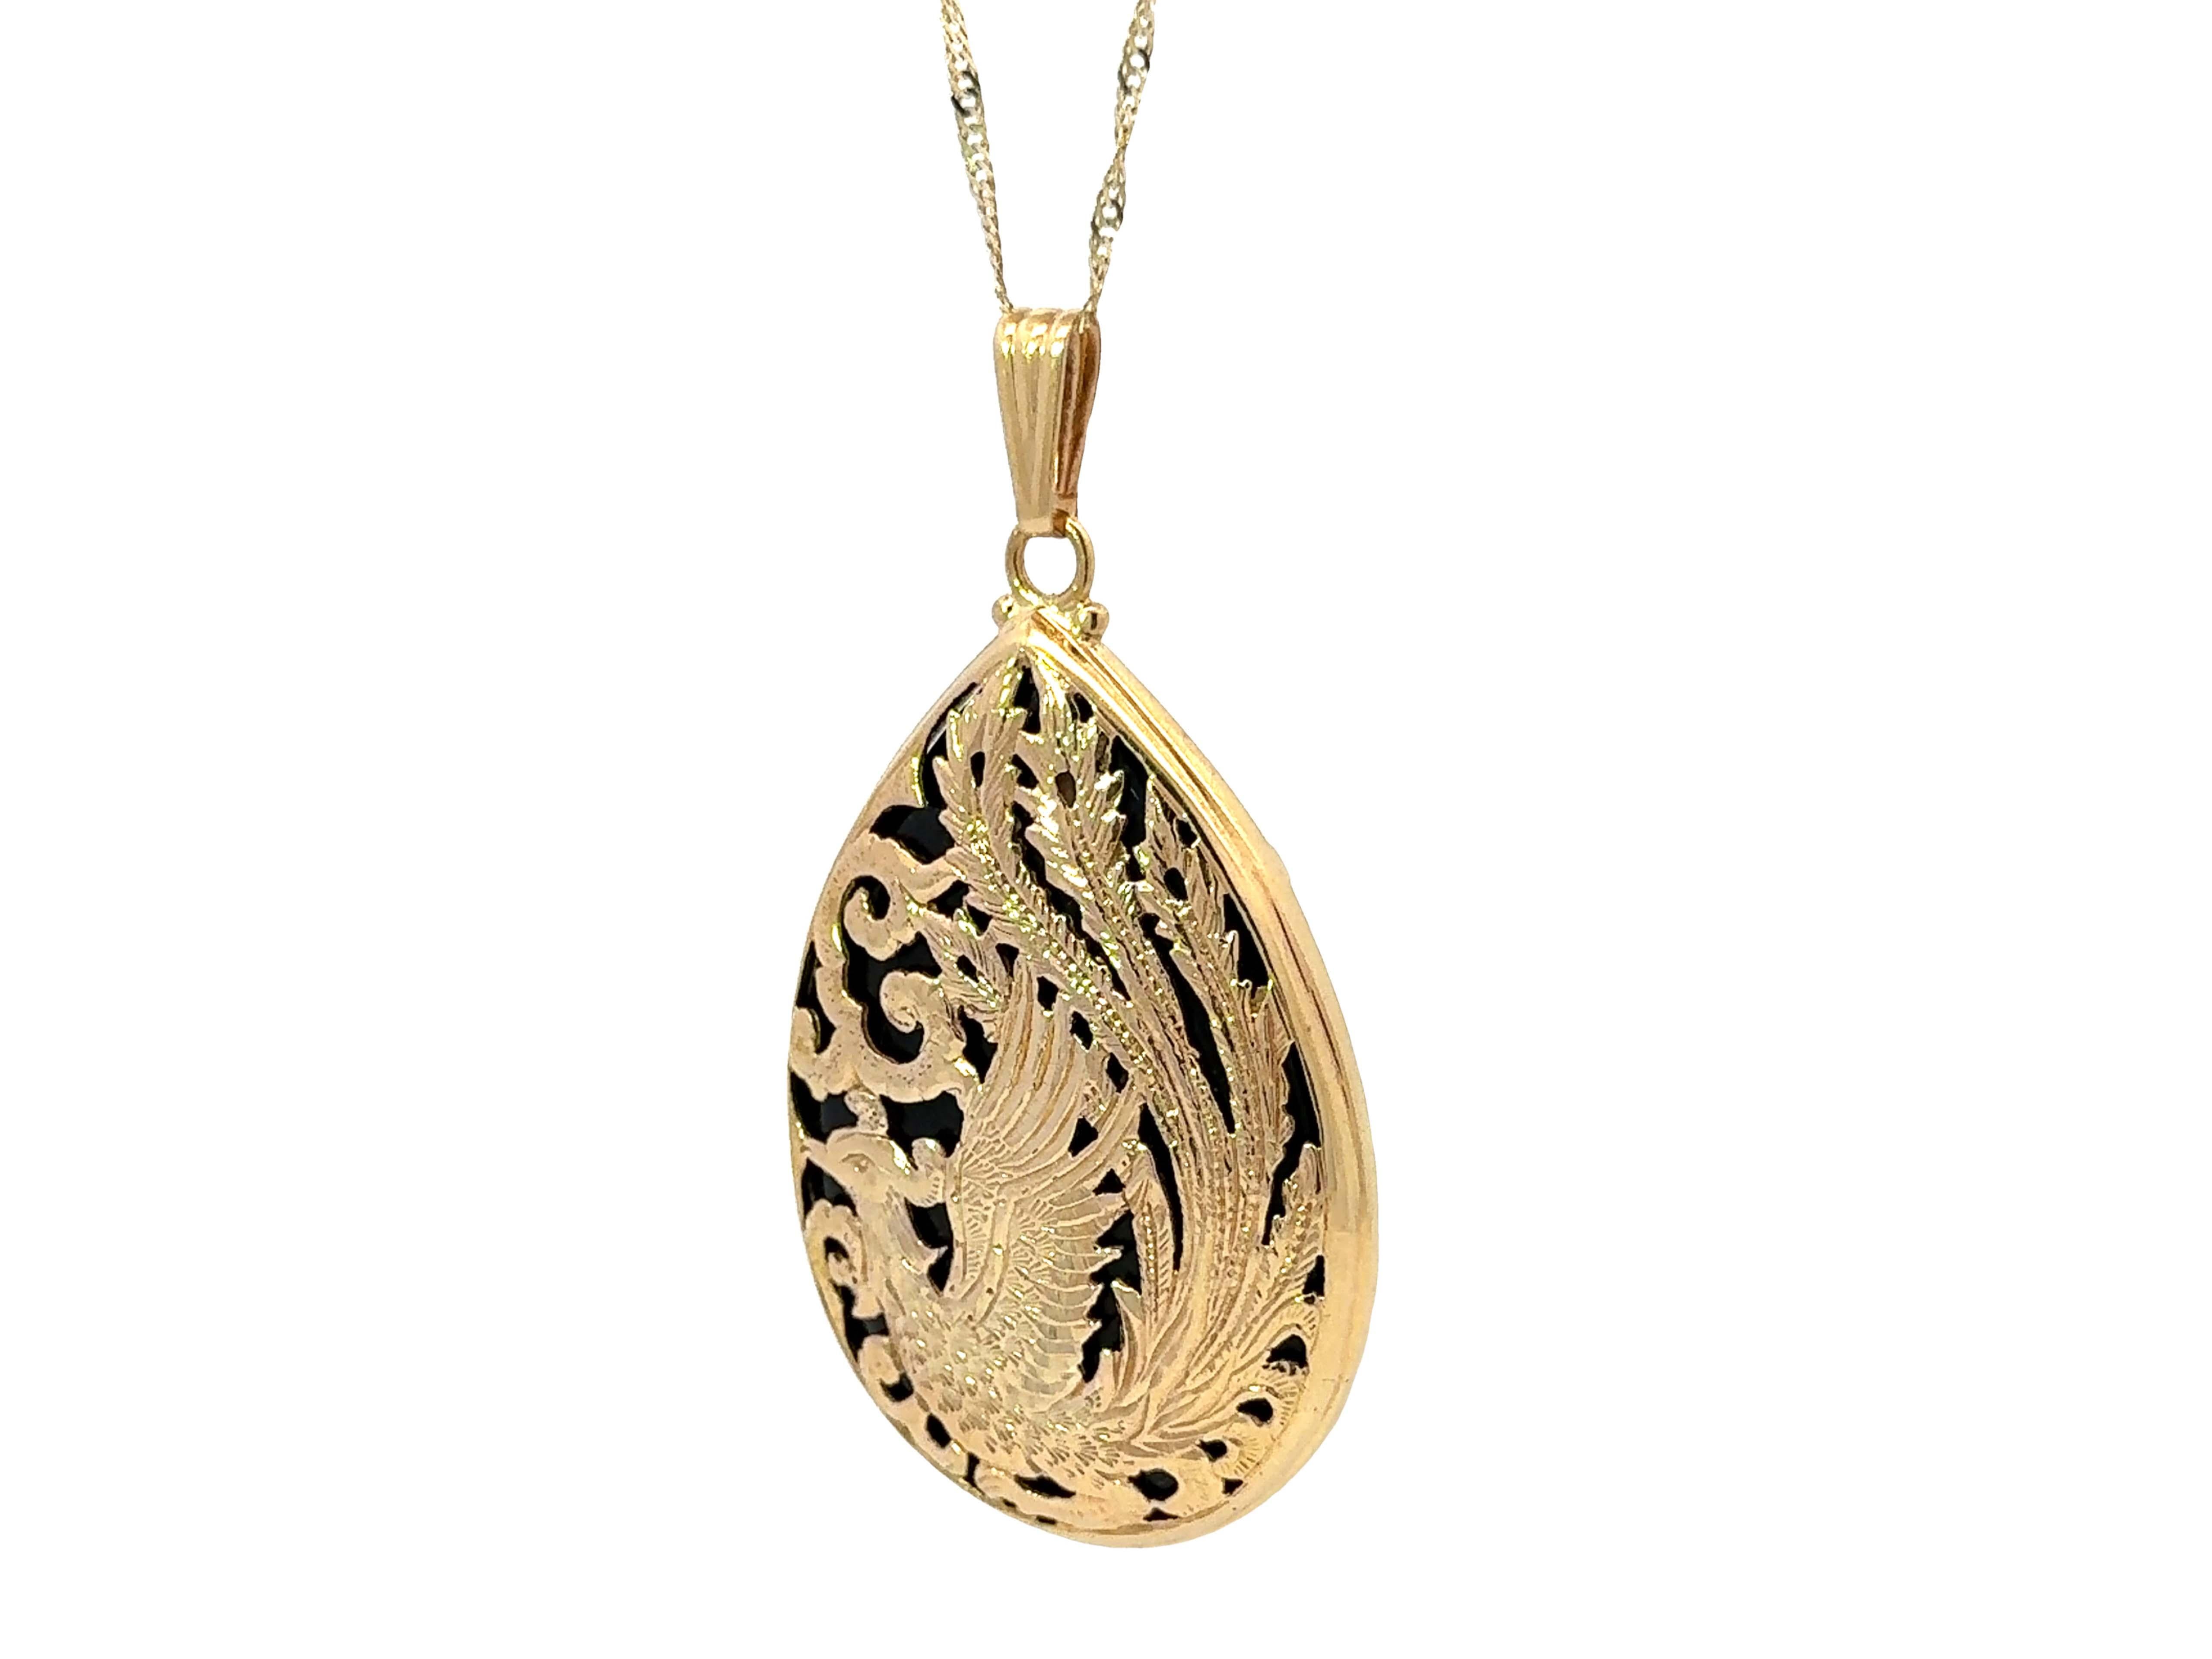 Ming's Hawaii Phoenix Onyx Pear Shaped Necklace 14k Yellow Gold In Excellent Condition For Sale In Honolulu, HI